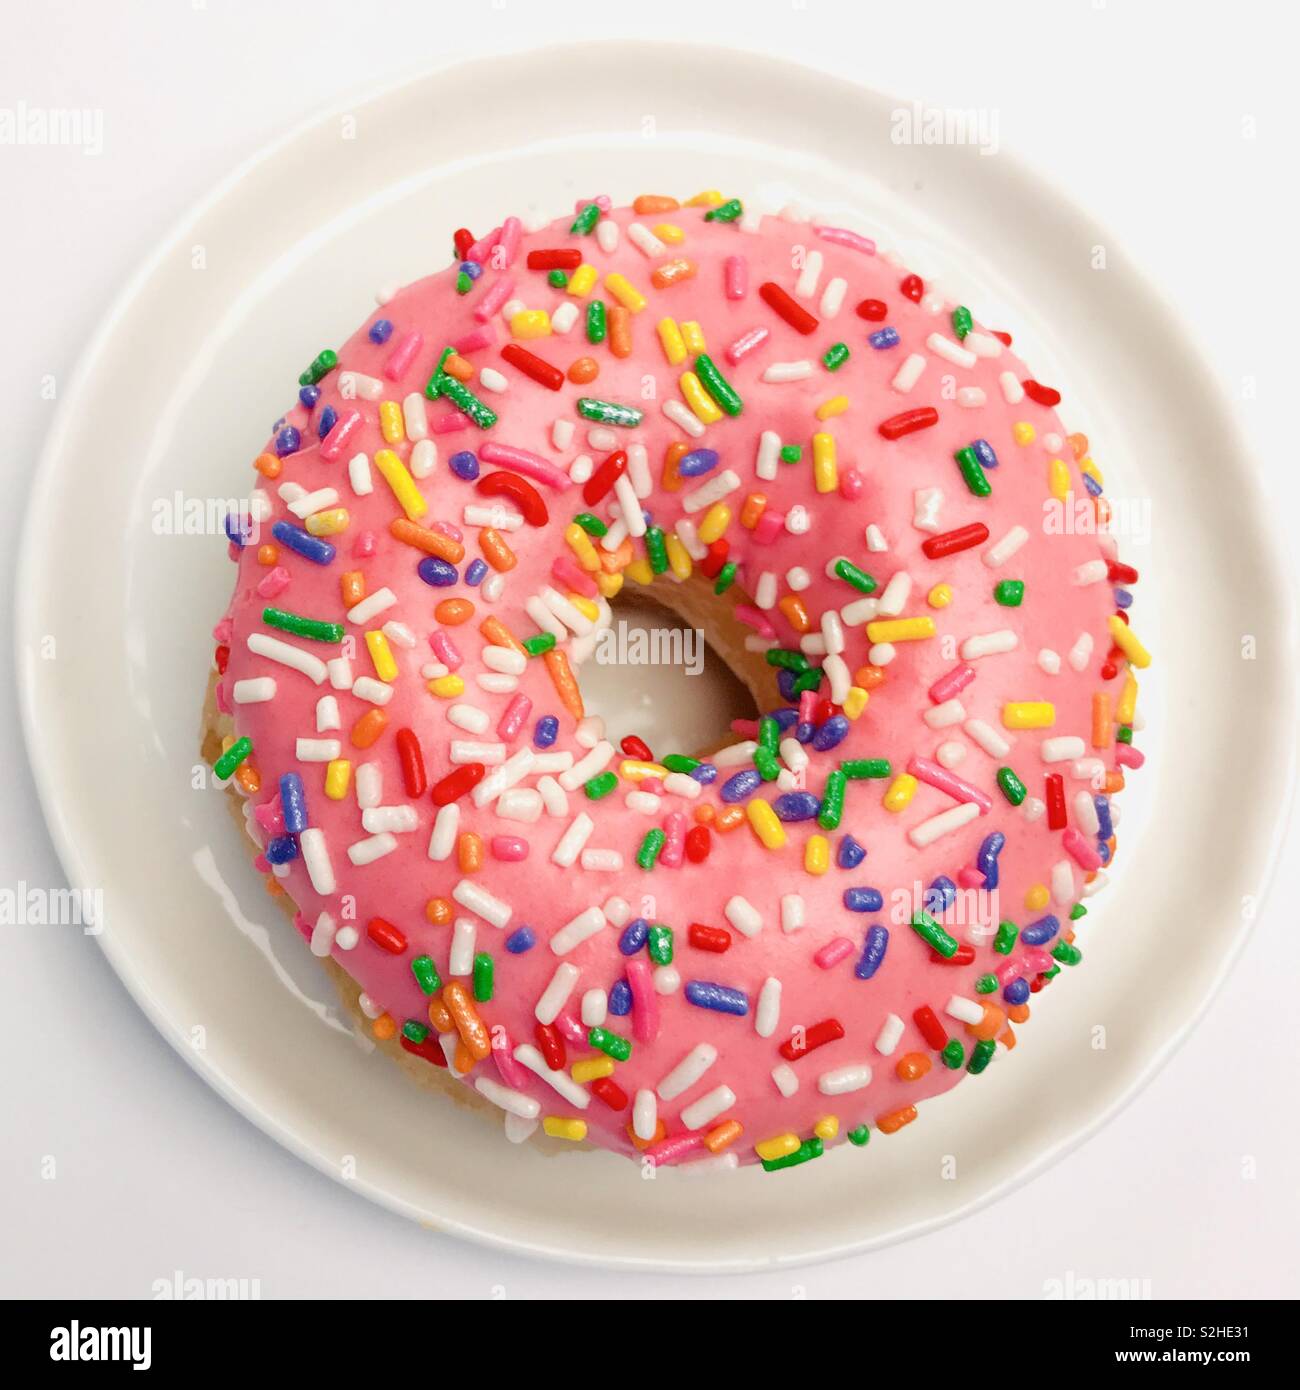 Top down view of a pink sprinkle donut. Stock Photo